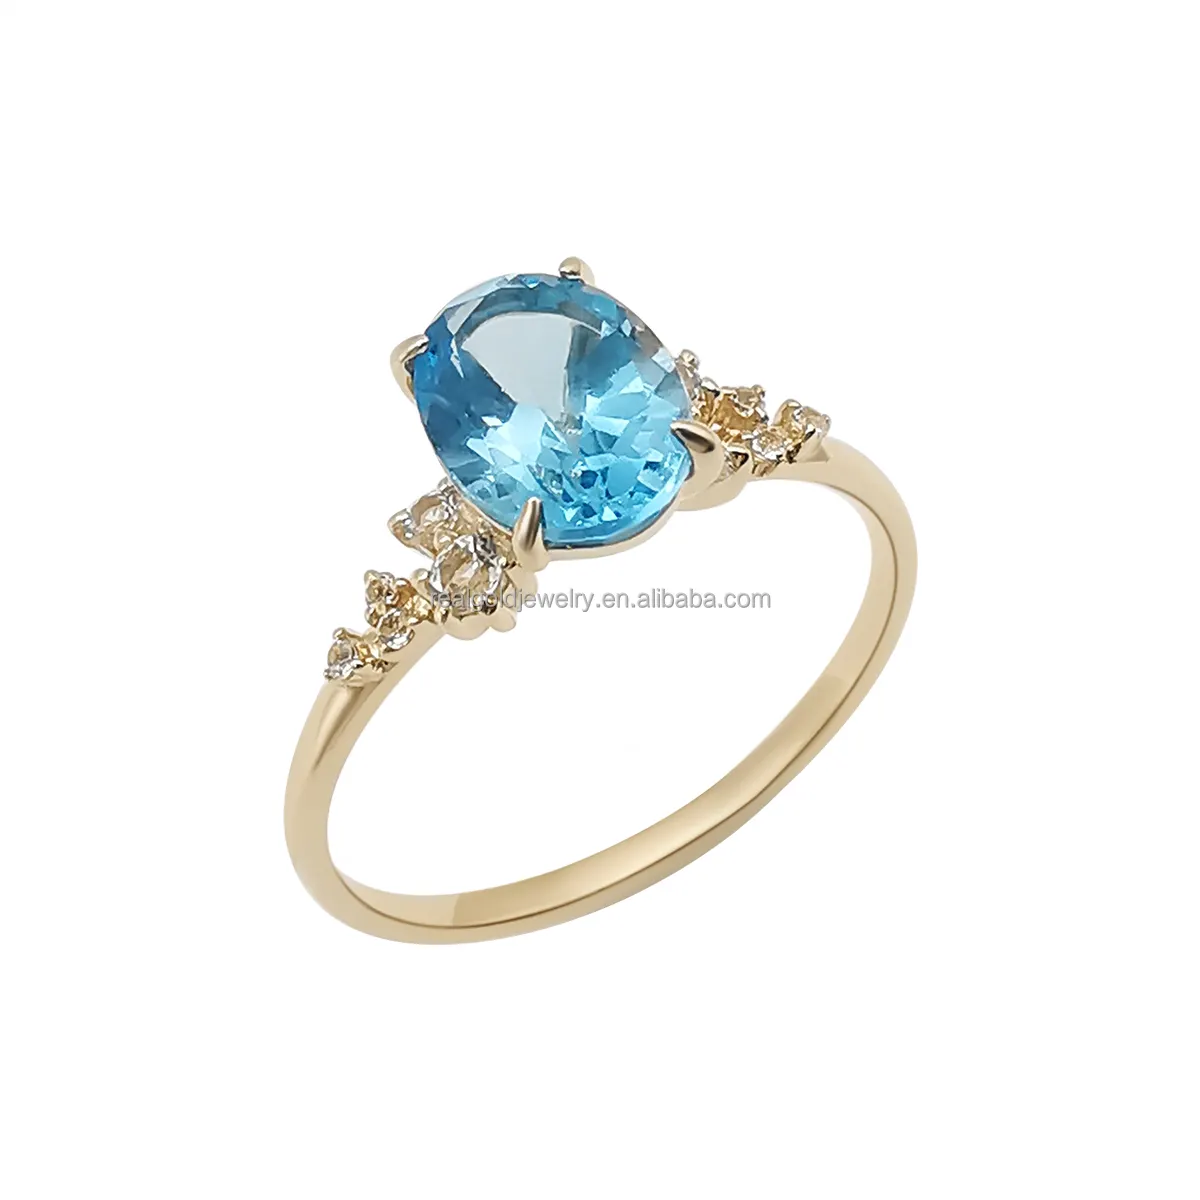 Hot Sale 14K Solid Gold Ring Blue Color Natural Topaz Stone Engagement Real Gold Jewelry Ring